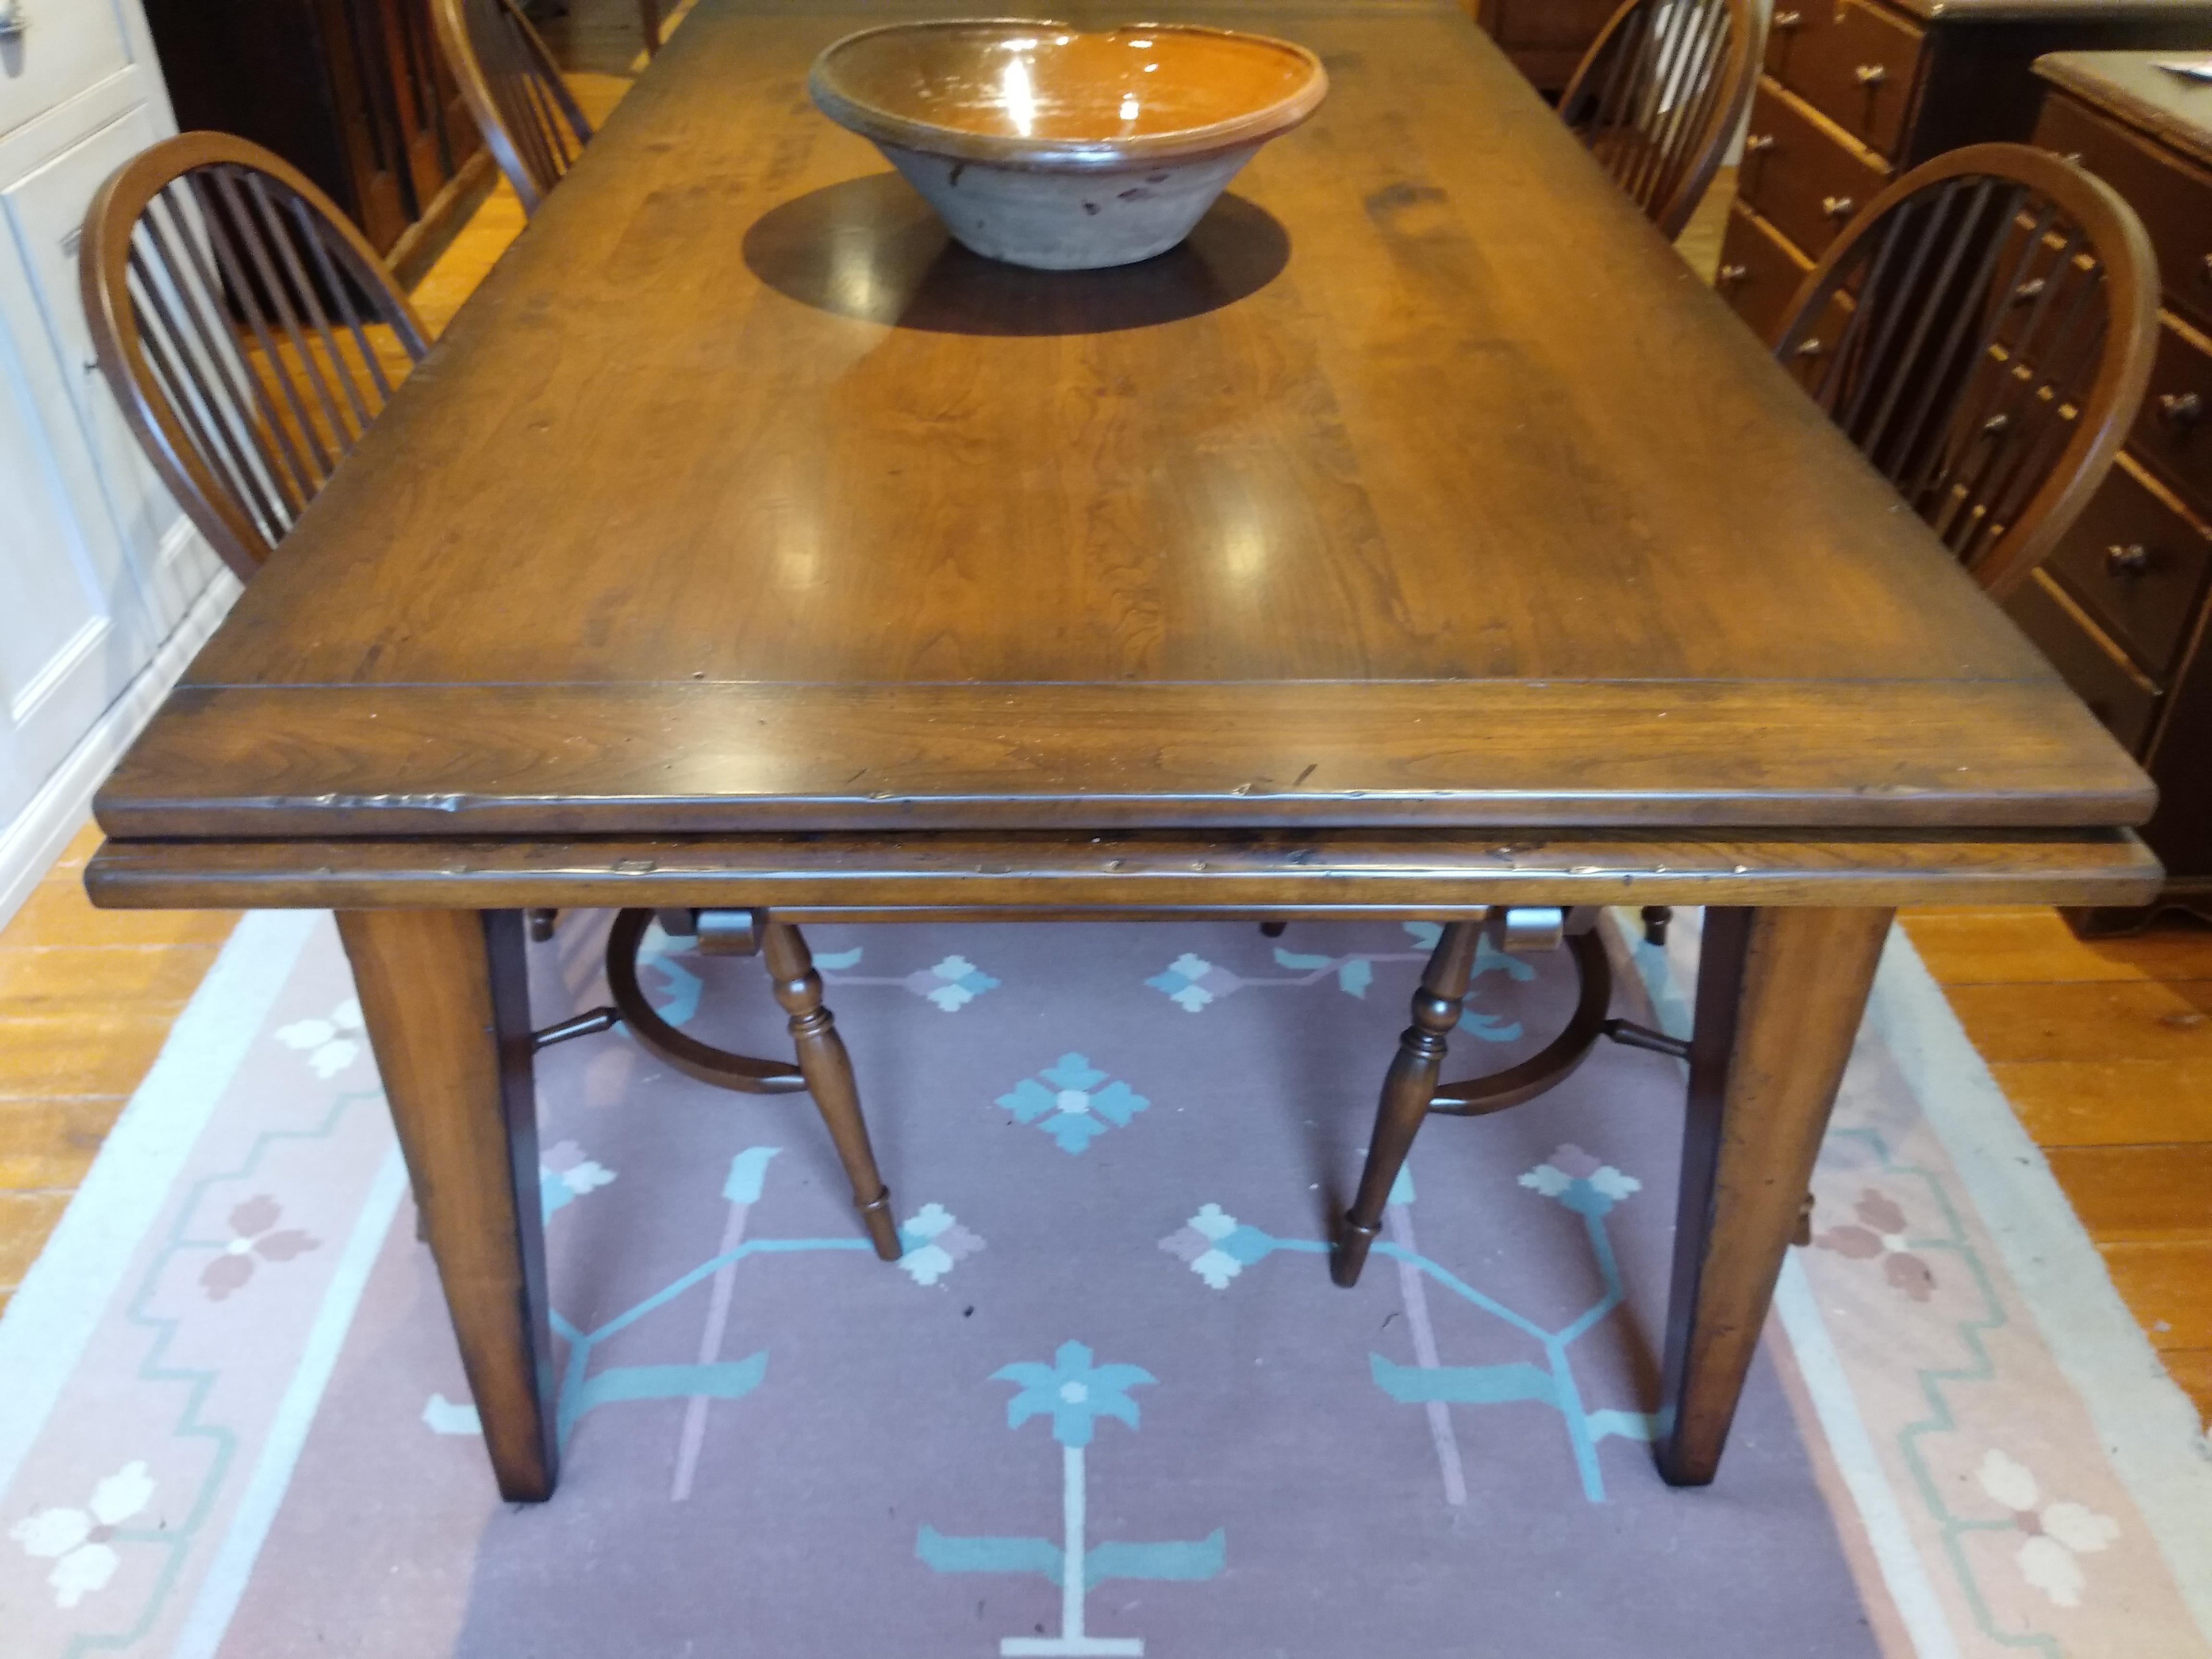 The dealer that makes us wonderful chairs in the US also makes a reproduction draw leaf cherry table in a wide variety of colors and fabulous patina. Each table comes with 2 x 20 inch leaves on either end -- and the leaves are easy as pie to put